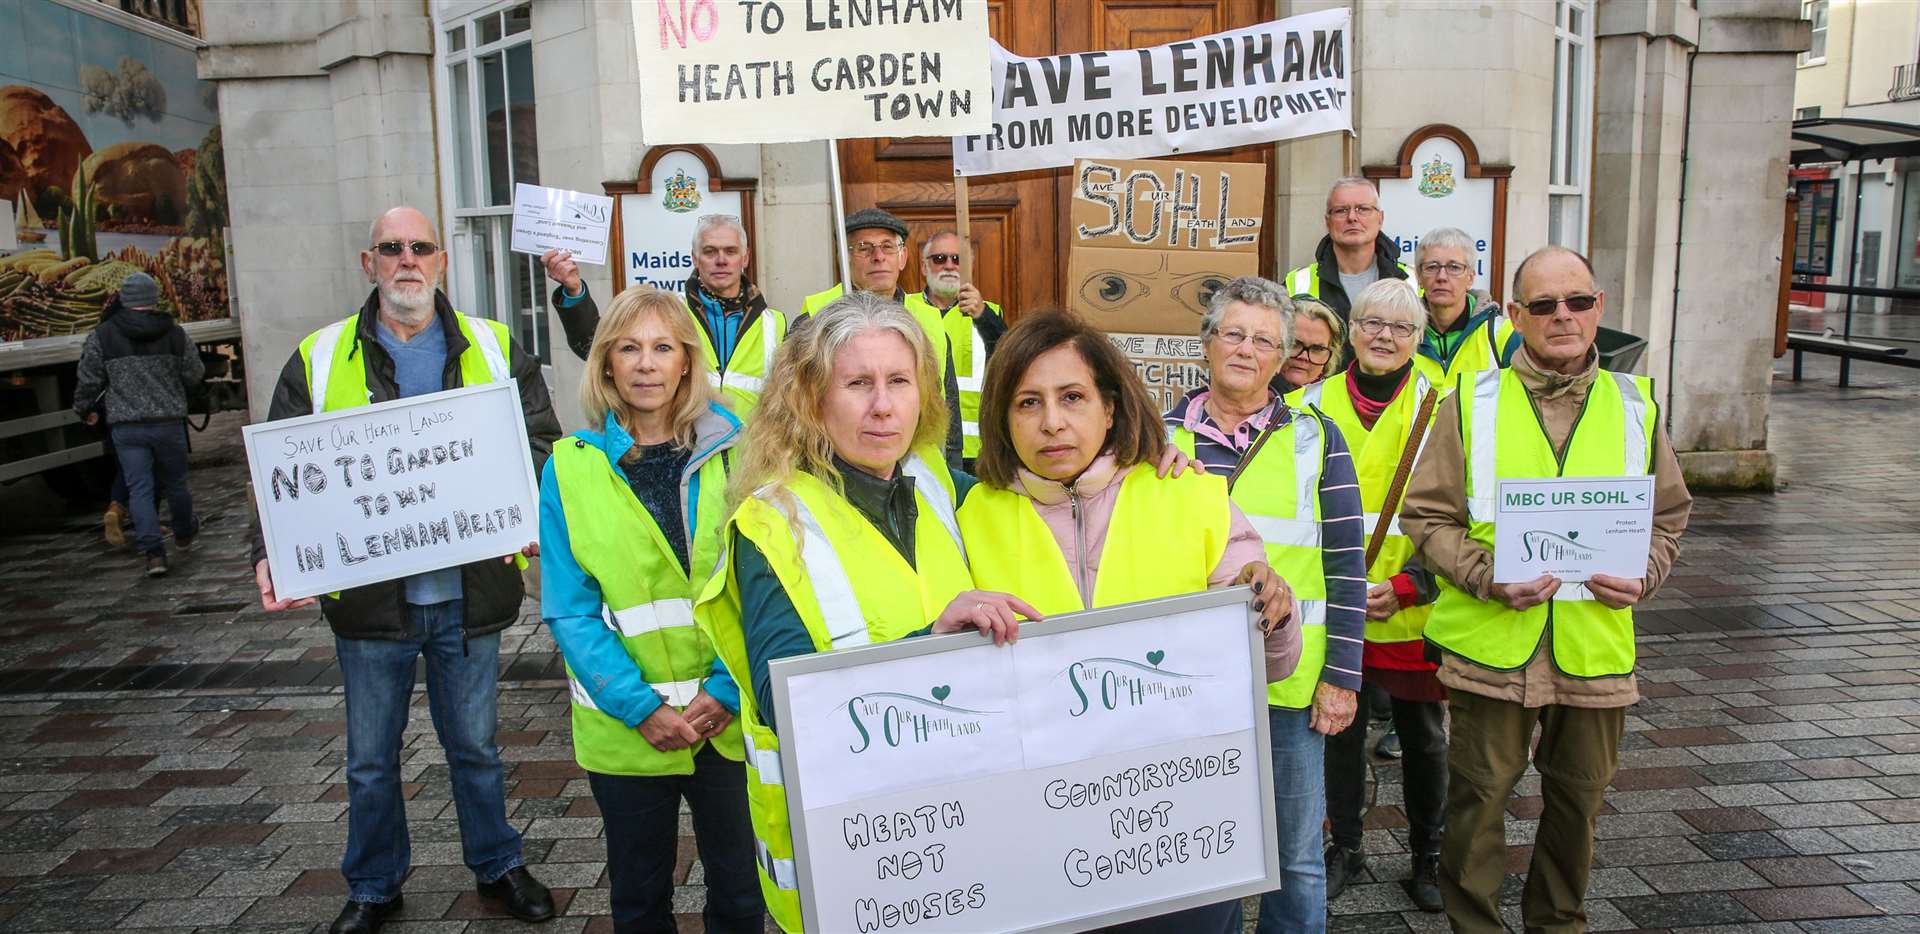 Protest march against MBC's 'Call for Sites' scheme in Lenham. Kate Hammond and Afsaneh Smith with other protestors. Picture: Matthew Walker.